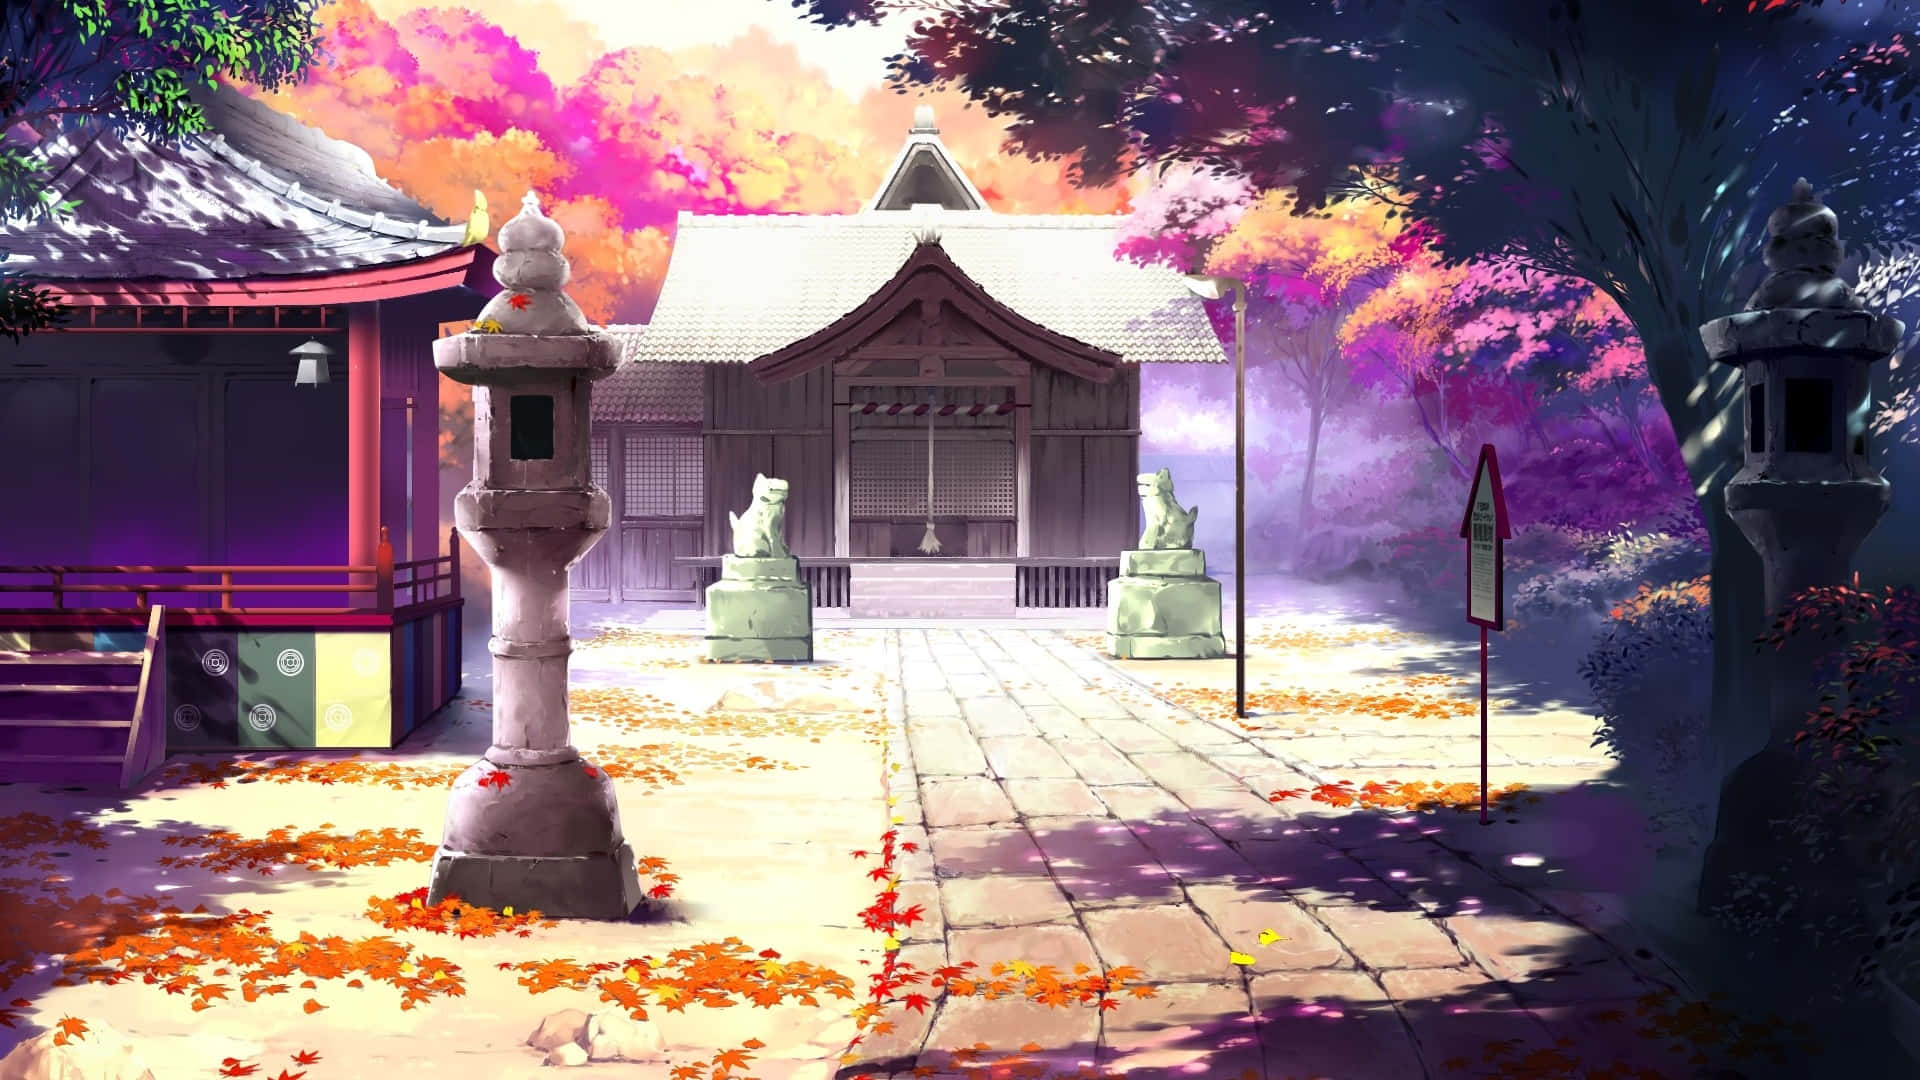 Enchanting Anime Landscape with Cherry Blossom Trees